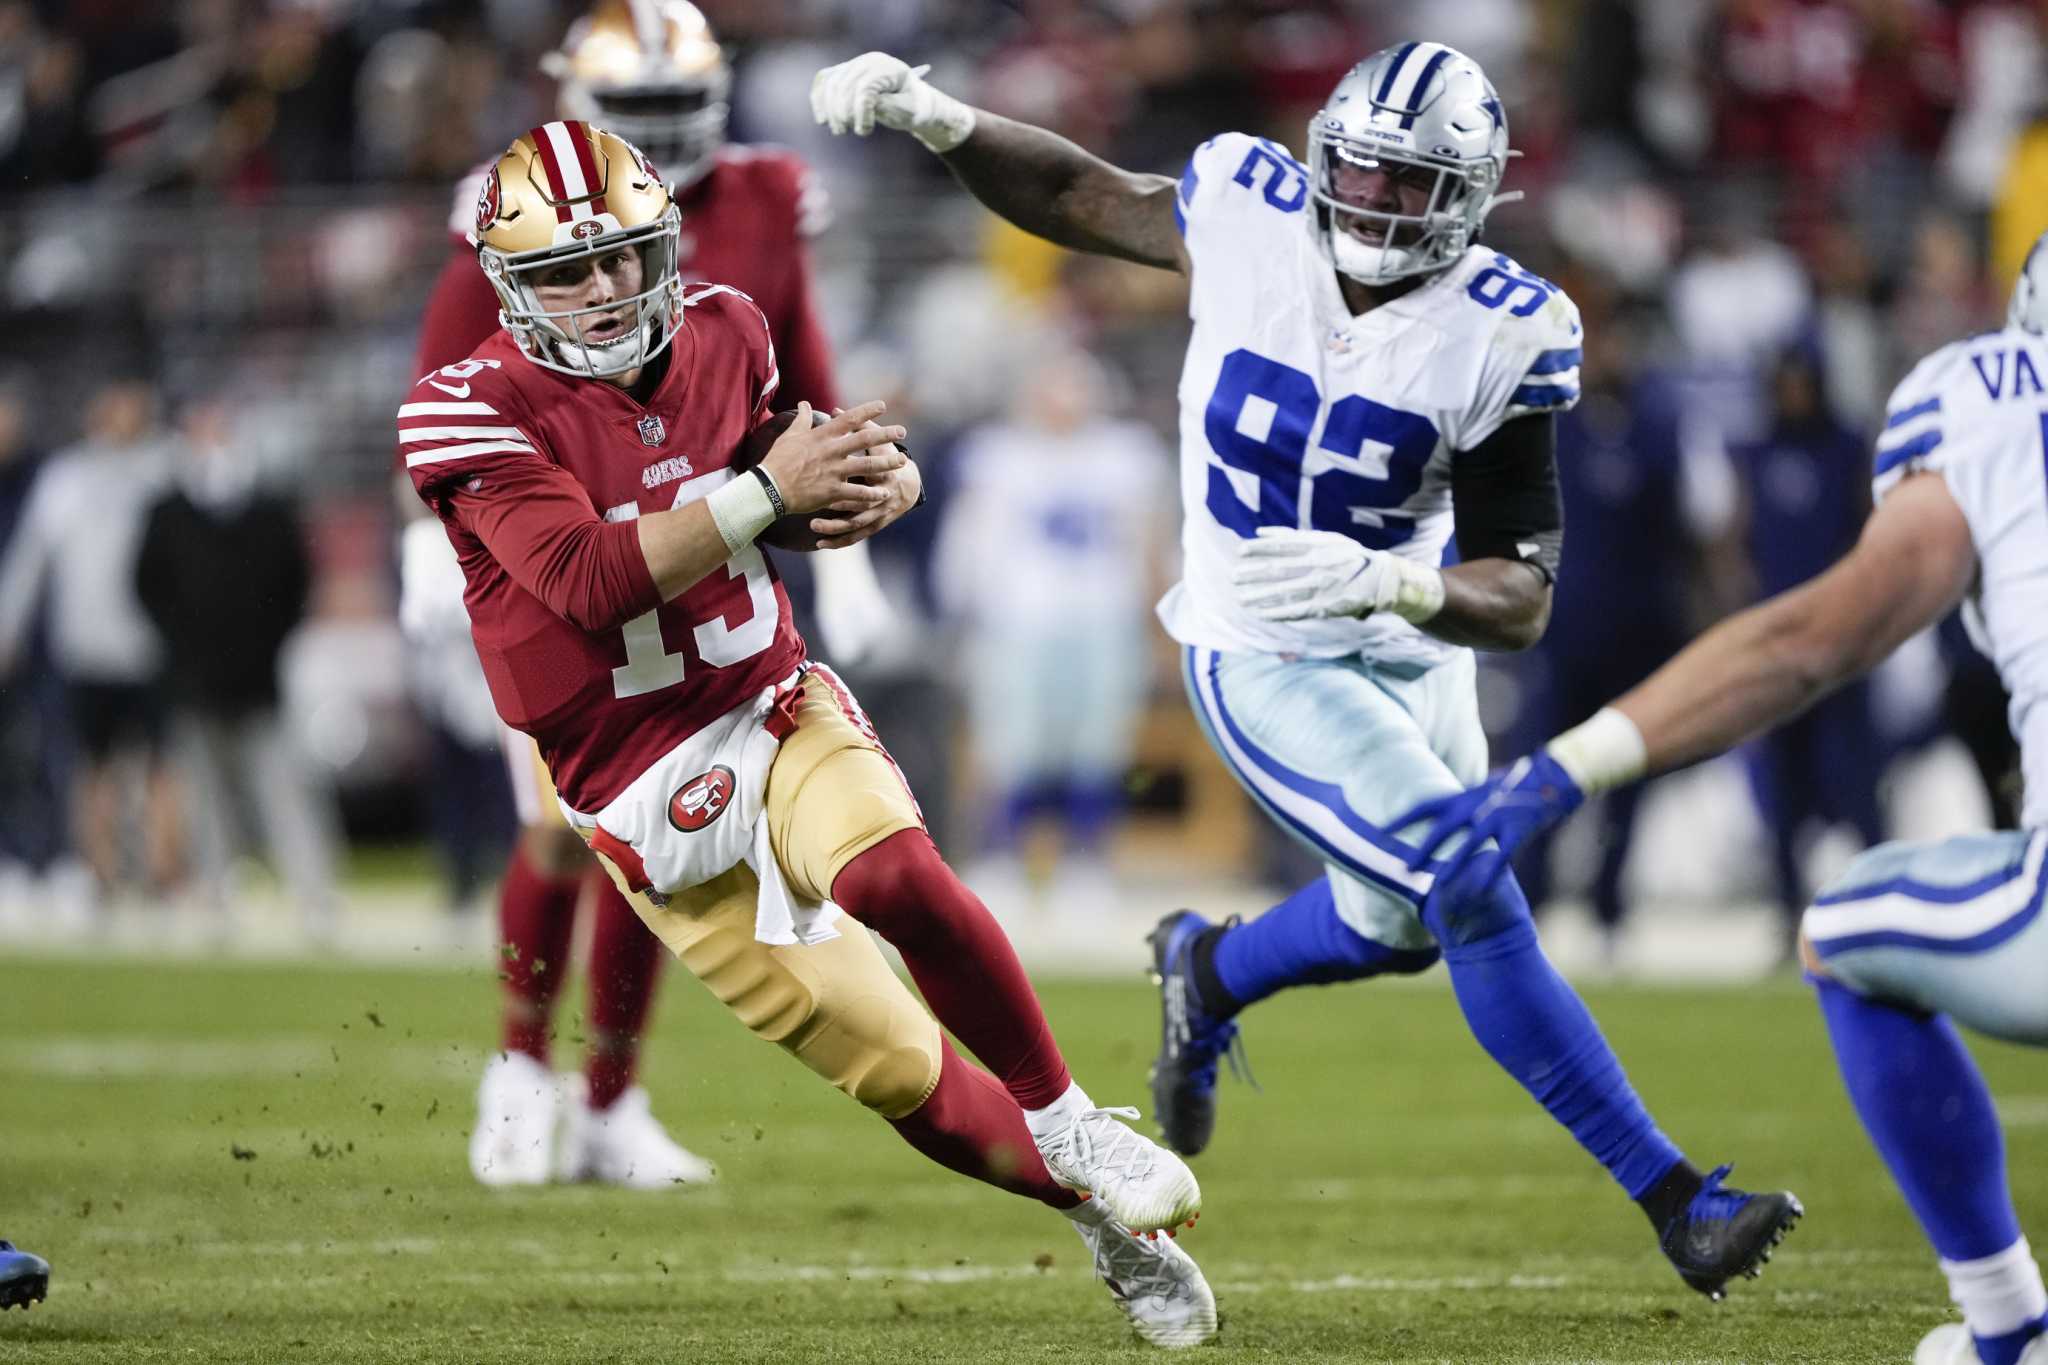 The Catch' at 40: 5 things to know about that 49ers-Cowboys game